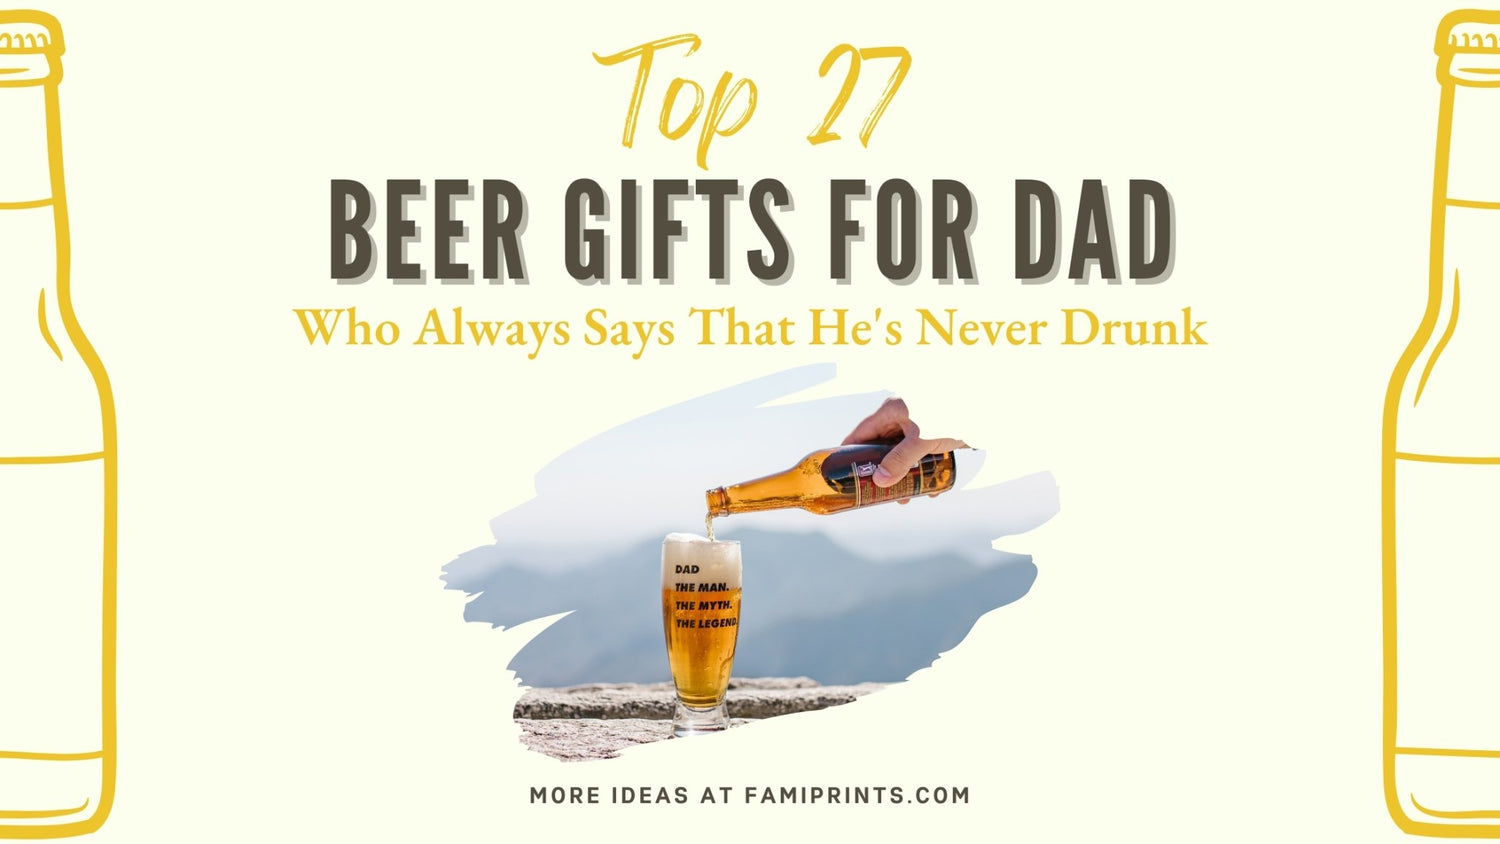 https://famiprints.com/cdn/shop/articles/top-27-beer-gifts-for-dad-who-always-says-that-hes-never-drunk-181182.jpg?v=1659863258&width=1500